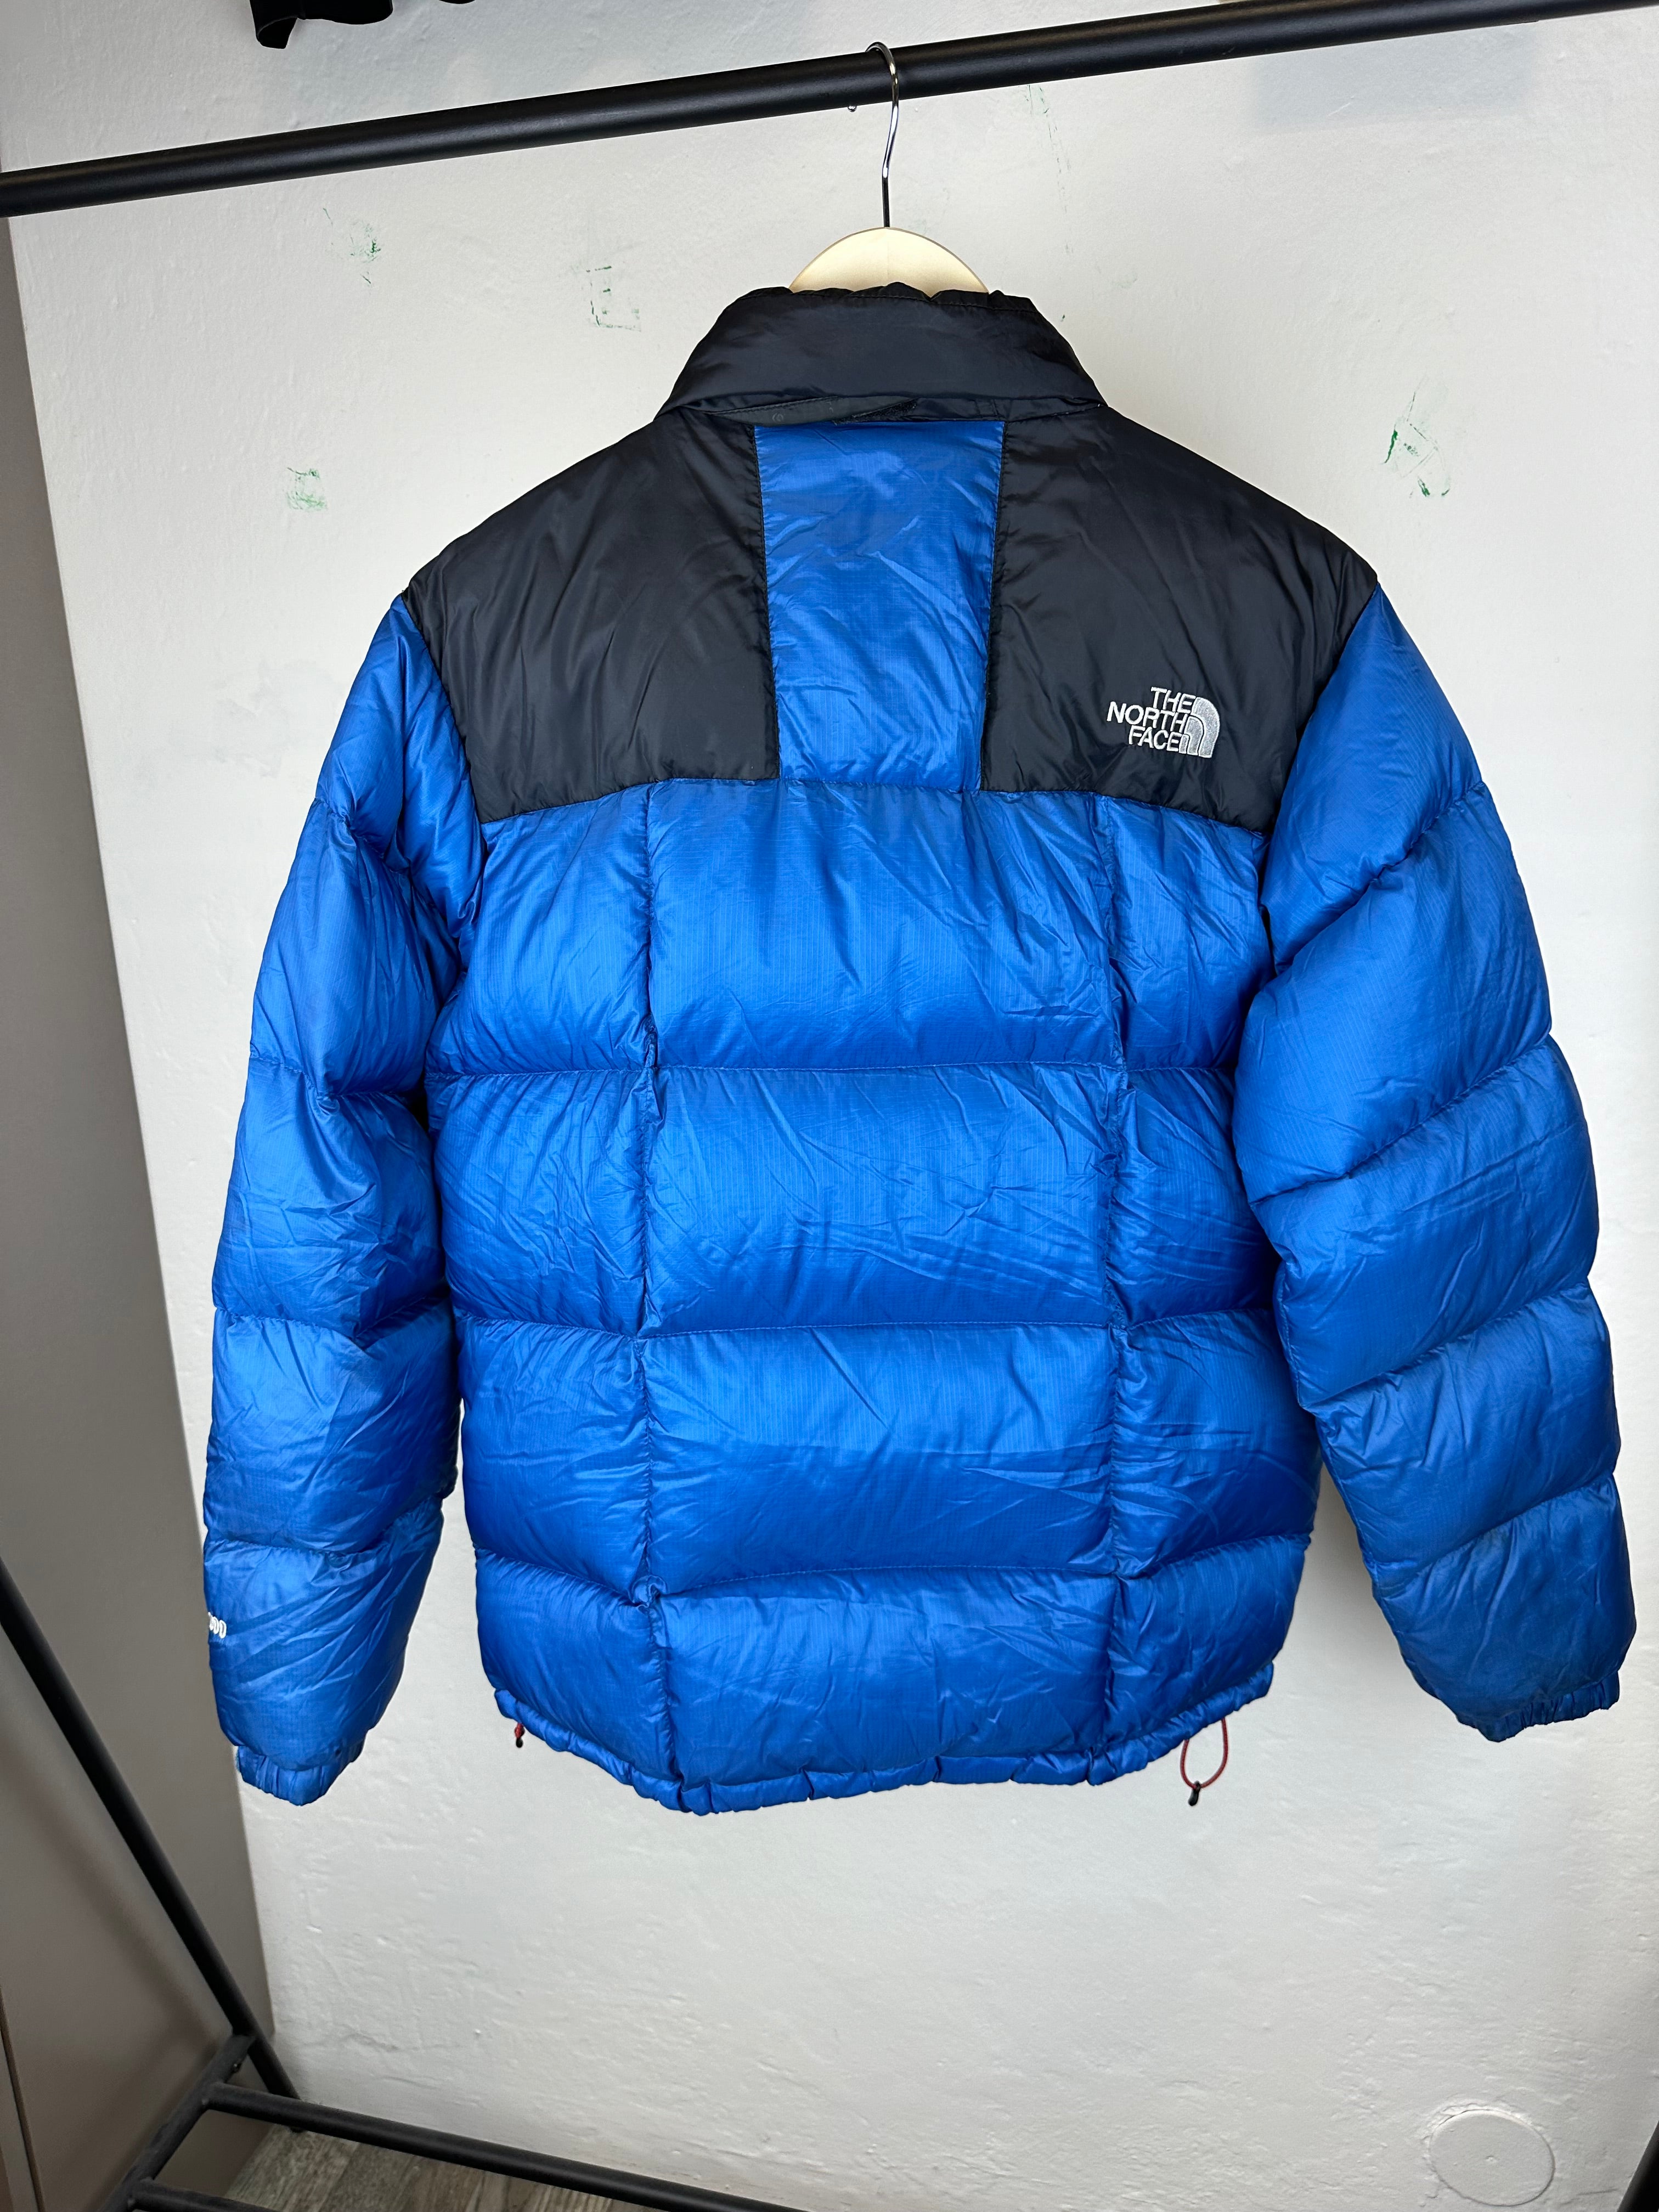 The North Face - Summit Series Puffer Jacket - size M